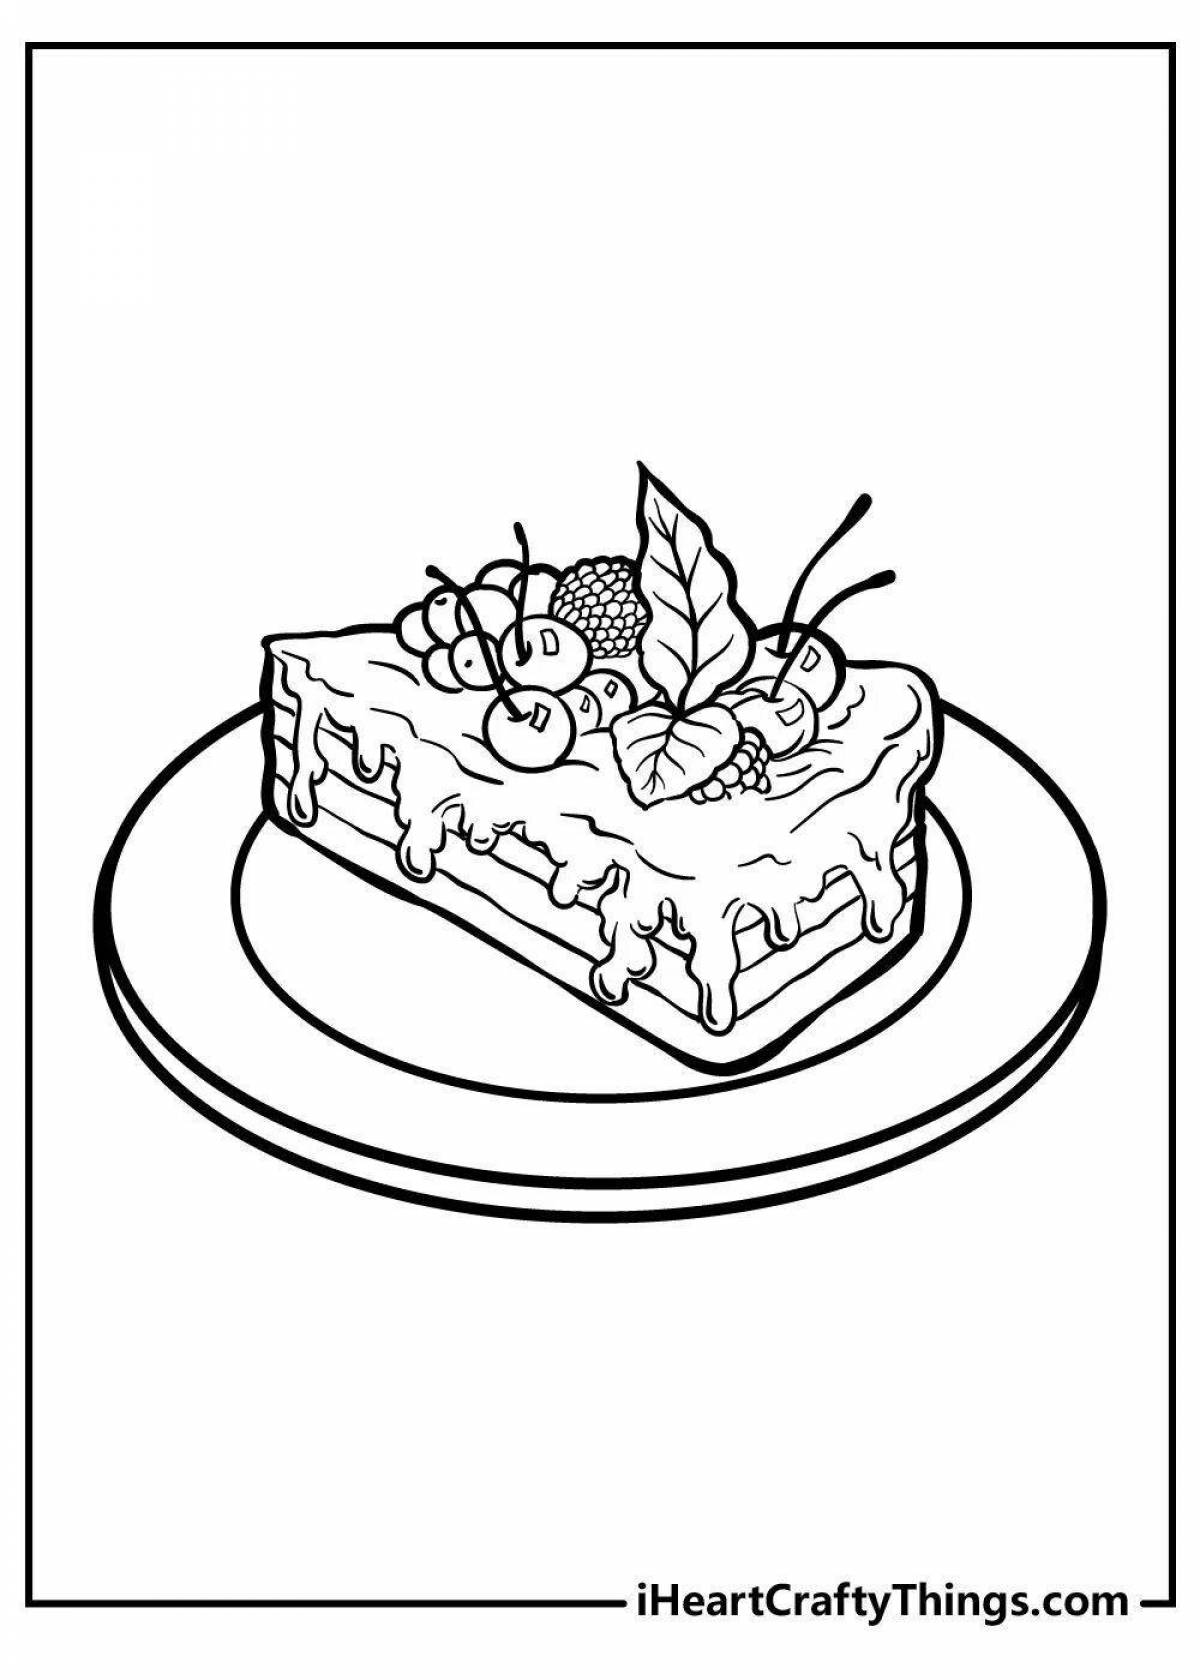 Colorful cake coloring pages for girls